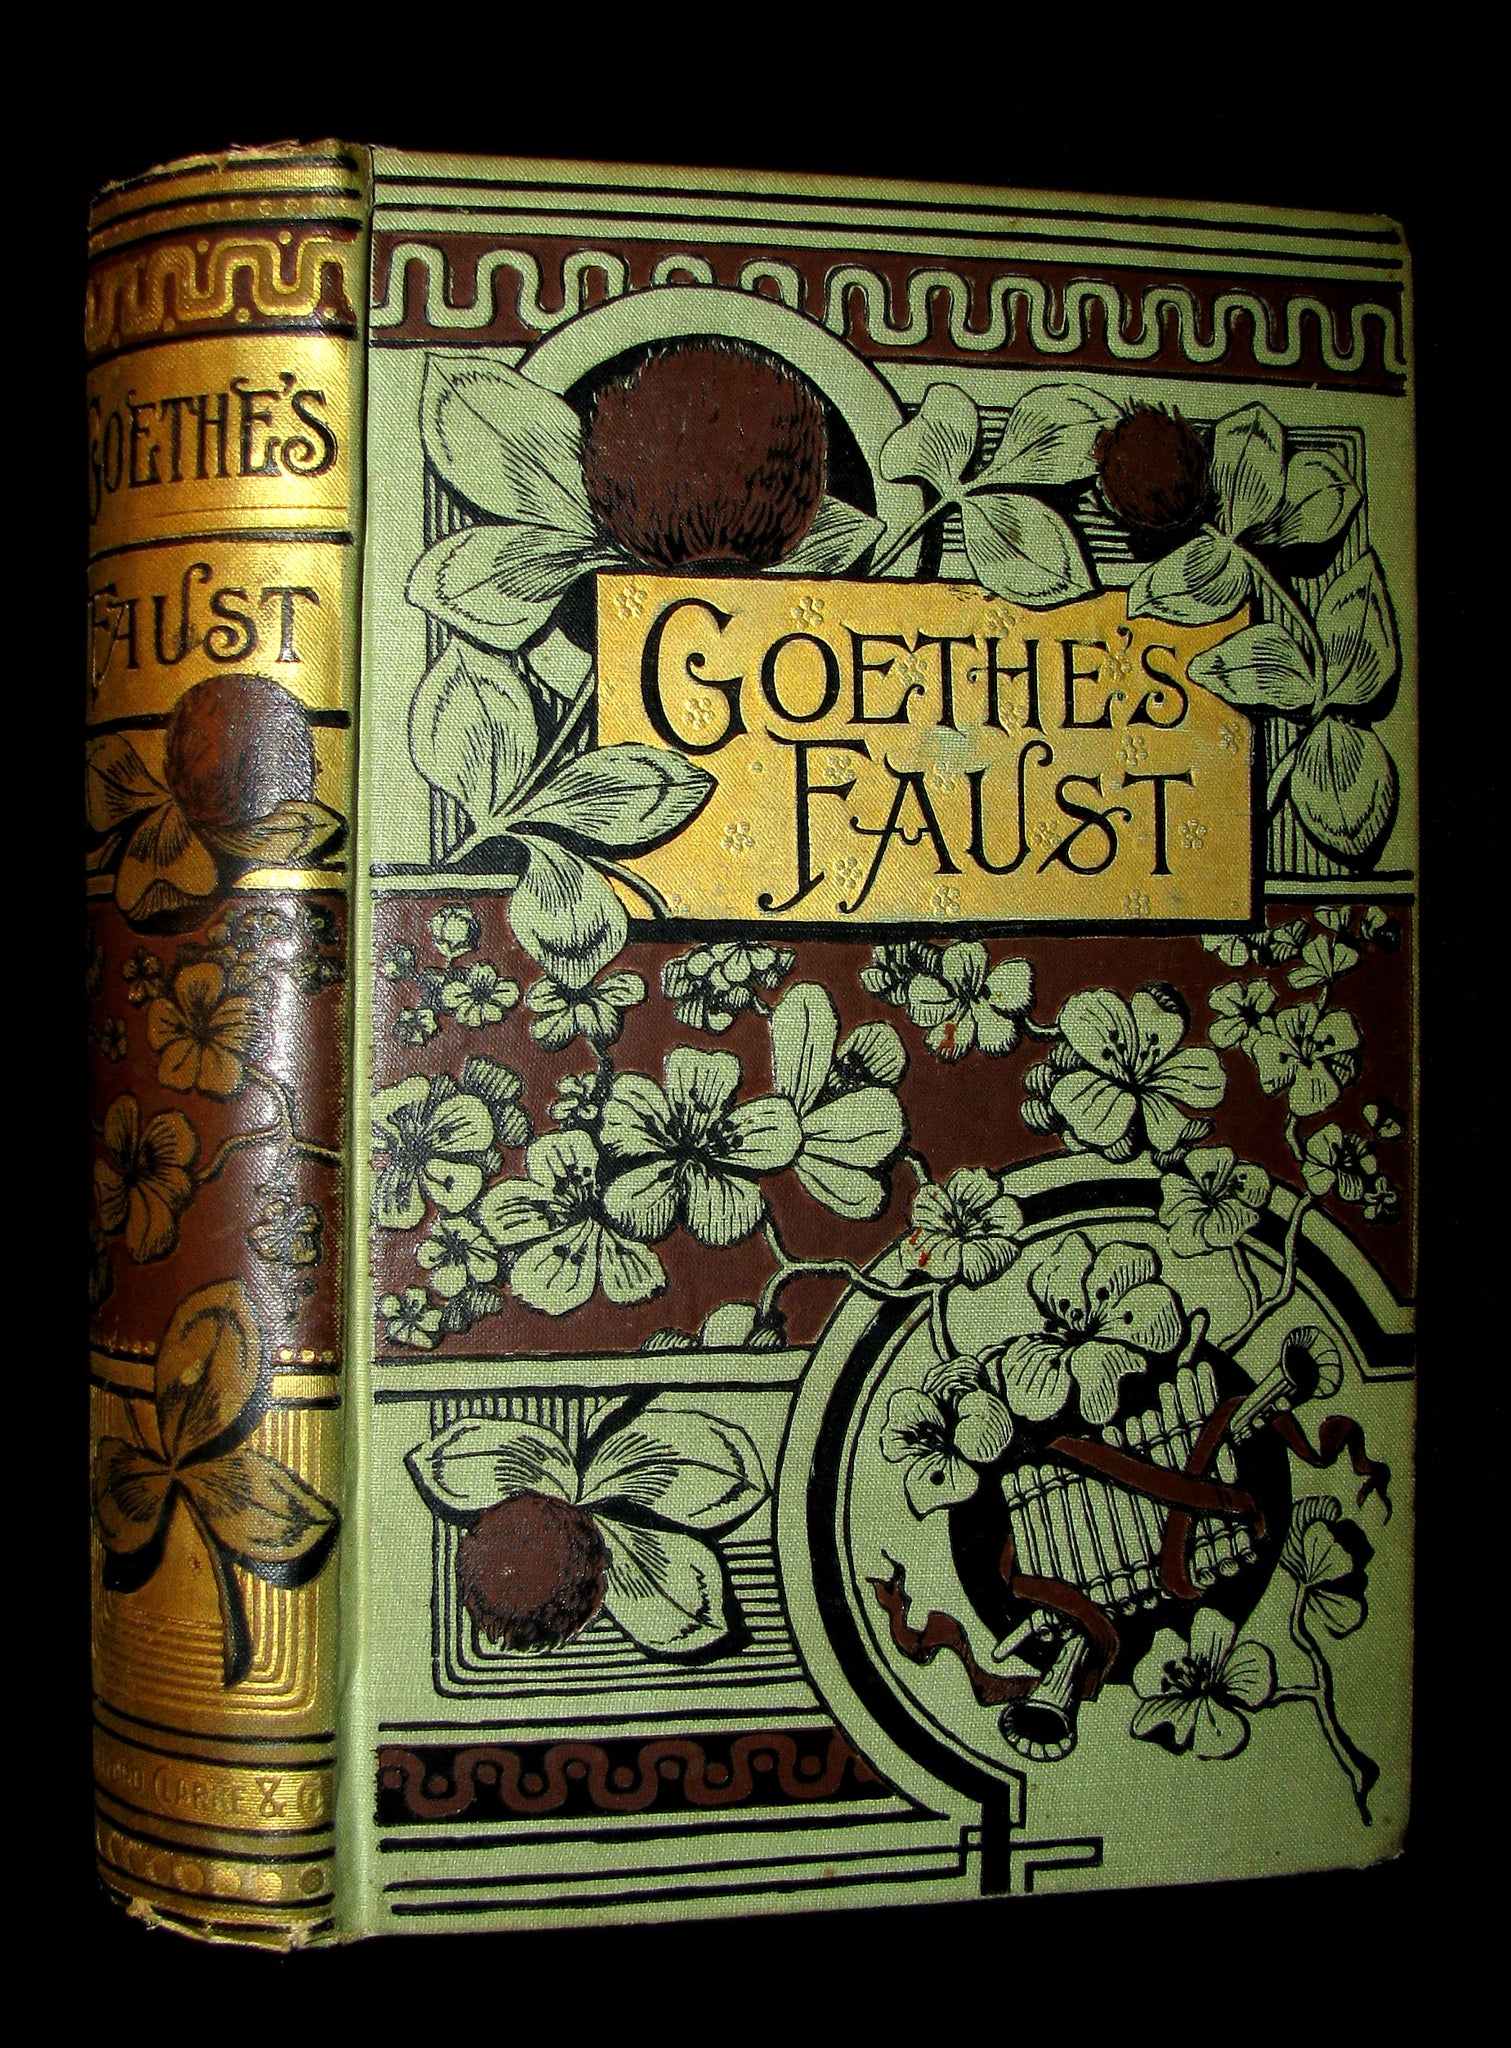 1880's Rare Victorian Book -  GOETHE'S FAUST in two parts illustrated